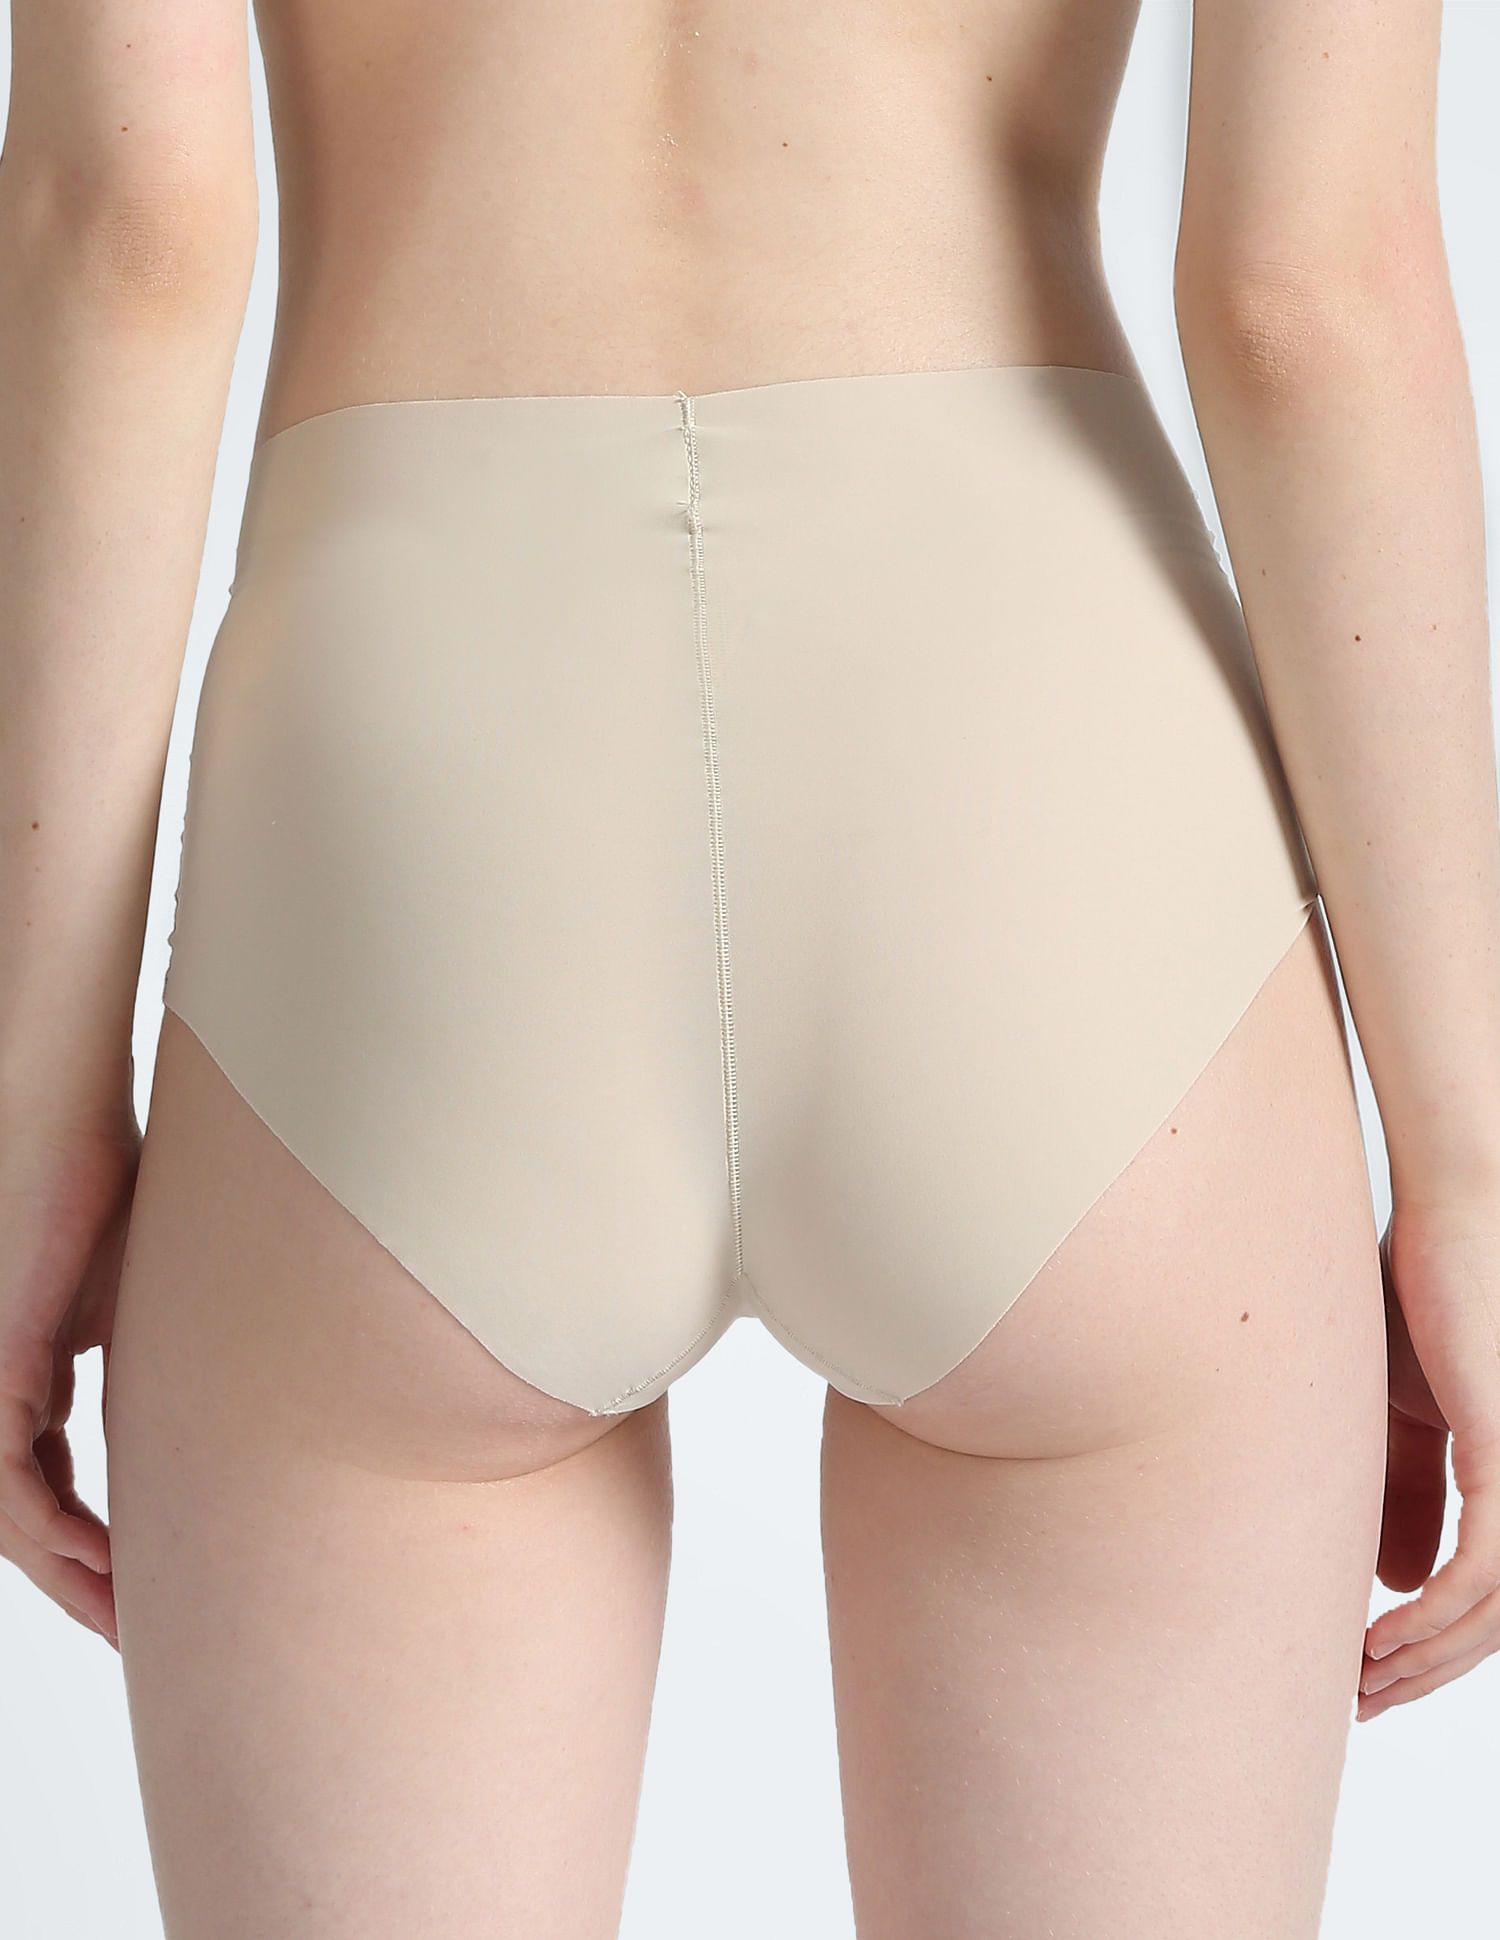 Buy Calvin Klein Underwear Mid Rise Solid Hipster Panties - NNNOW.com